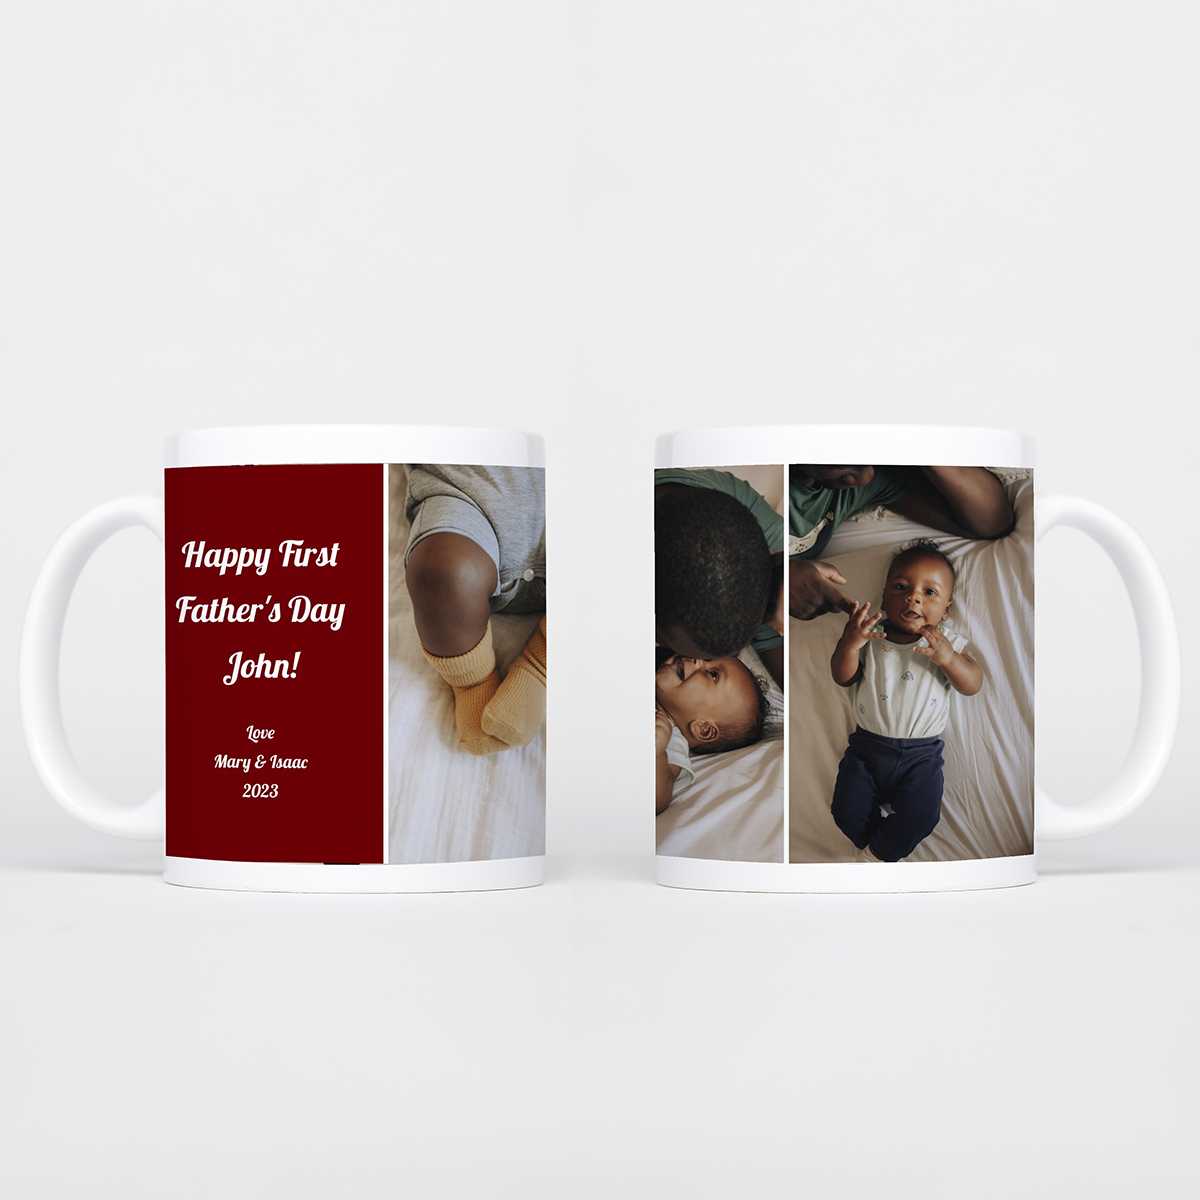 Dad mug with 3 images of a father playing with his infant child. A red square contains text that reads 